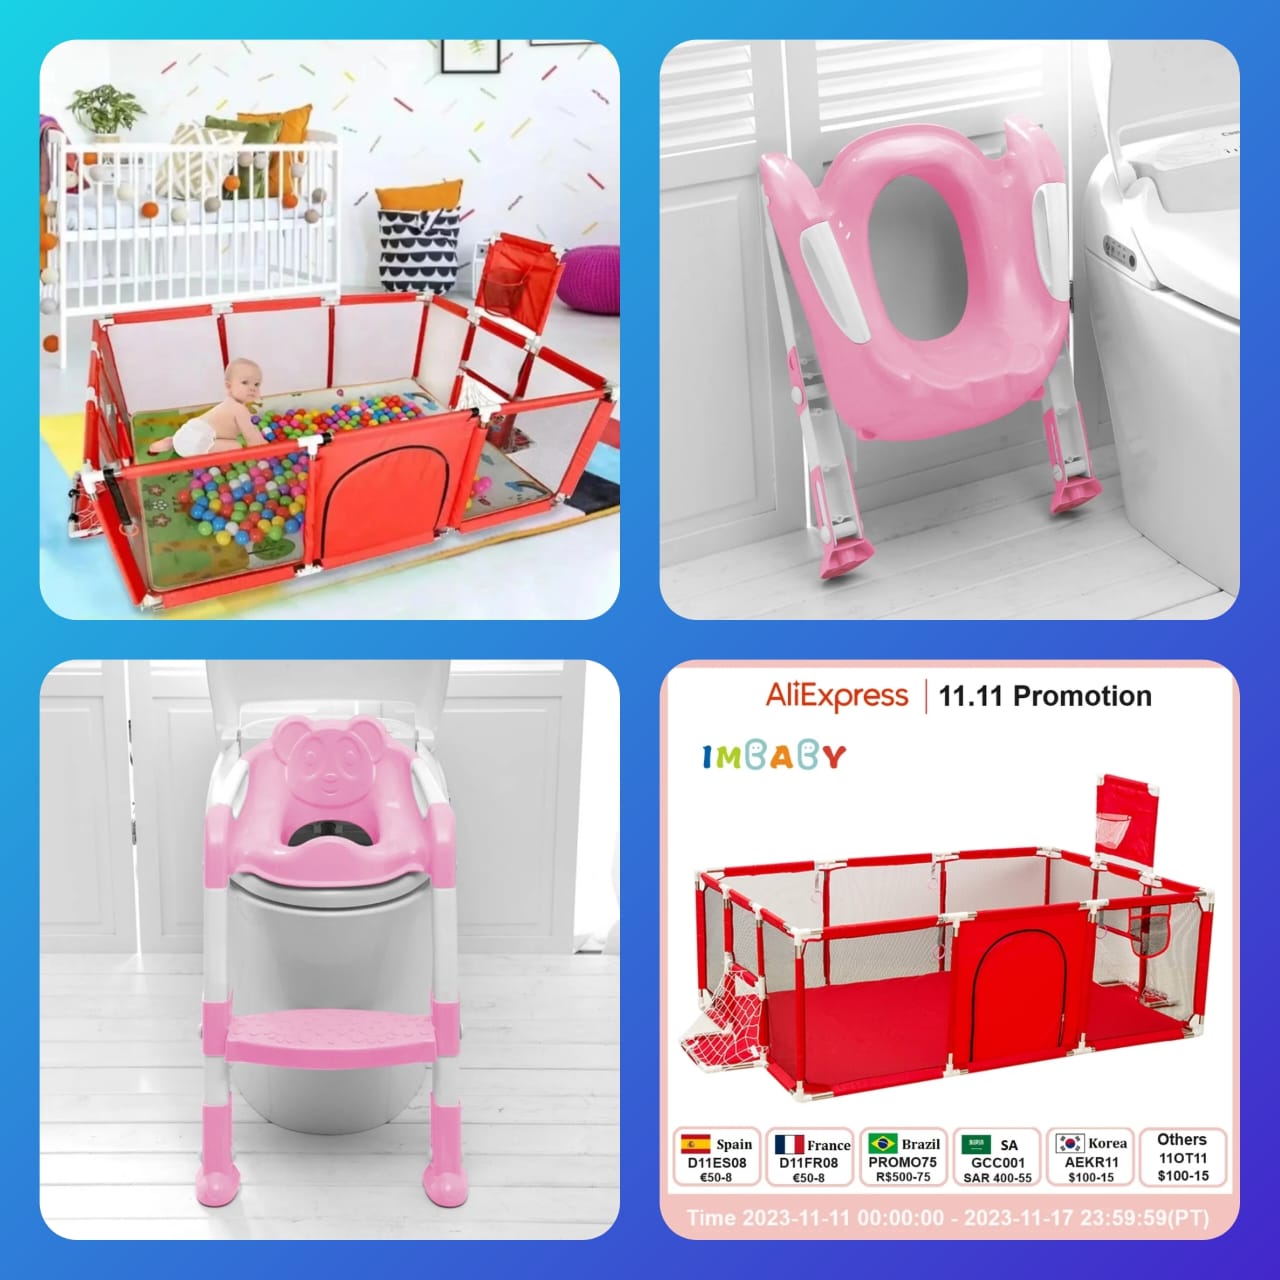 Large Playpen for Babies and Toddlers + Teddie Children Toilet Ladder with Steps